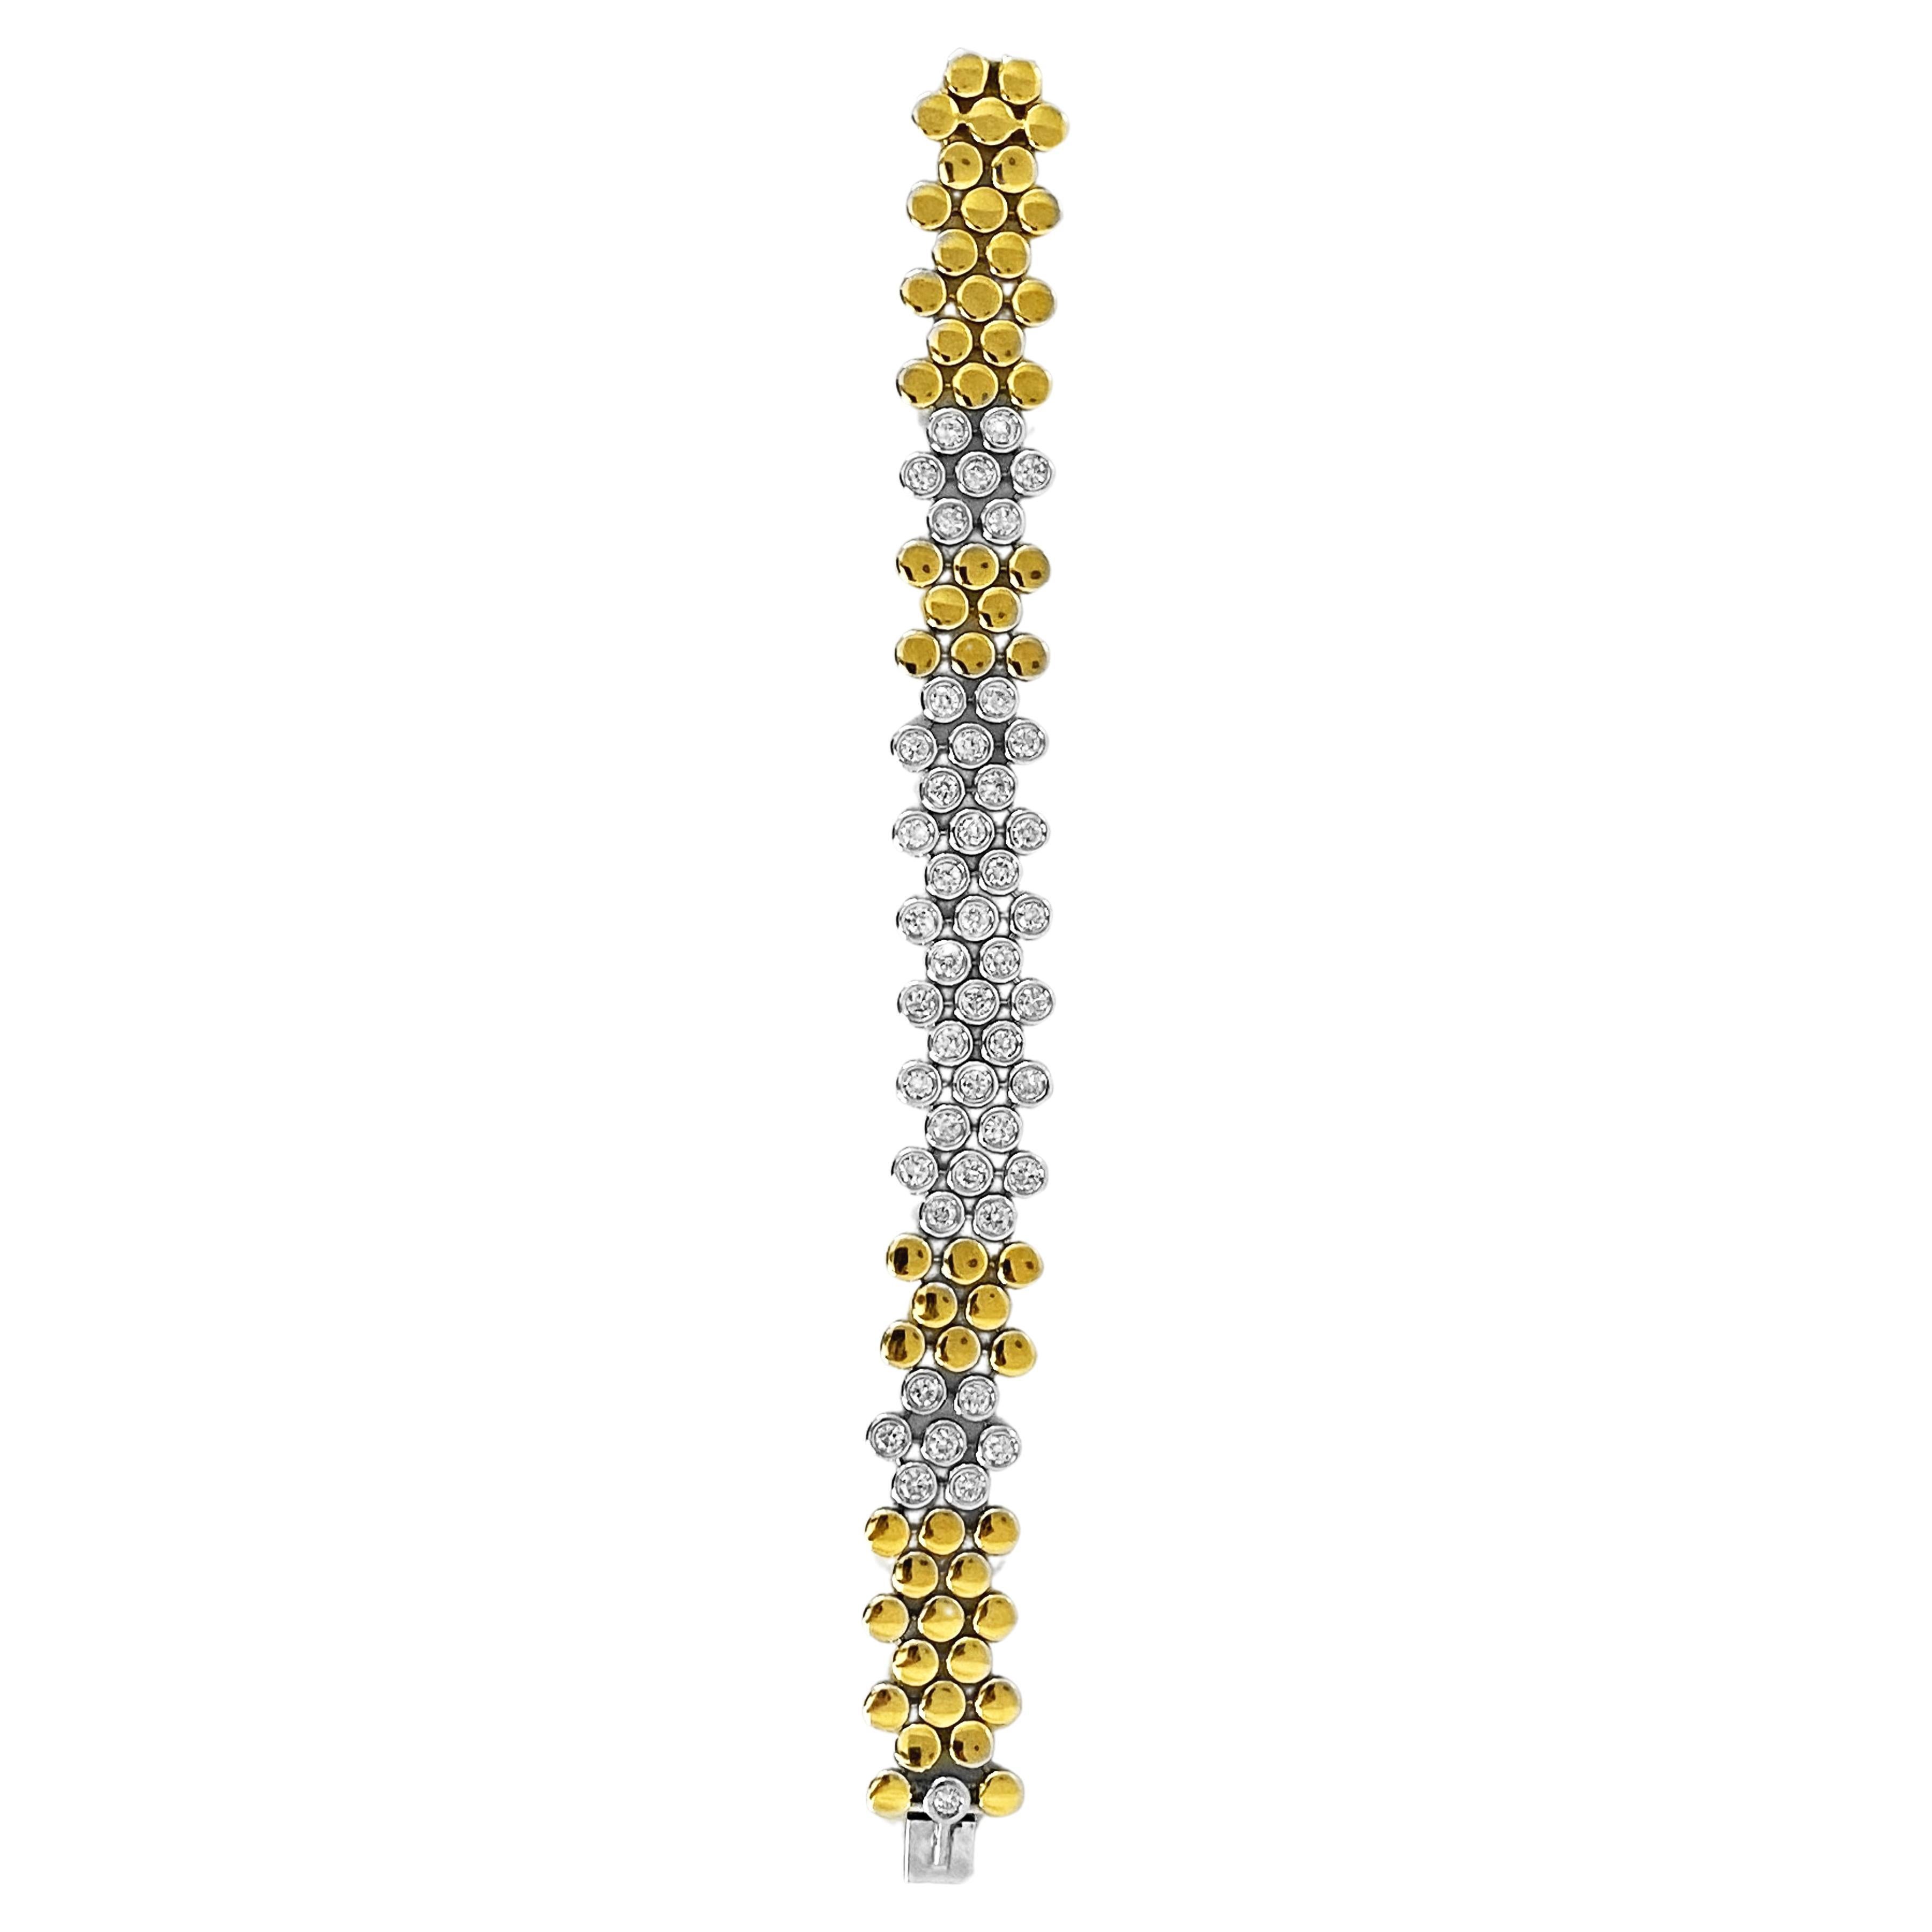 Introducing the epitome of elegance and luxury, the Scavia masterpiece bracelet showcases an exquisite arrangement of white brilliant-cut diamonds, expertly set within lustrous white and yellow gold settings. Each of the 47 round brilliant-cut